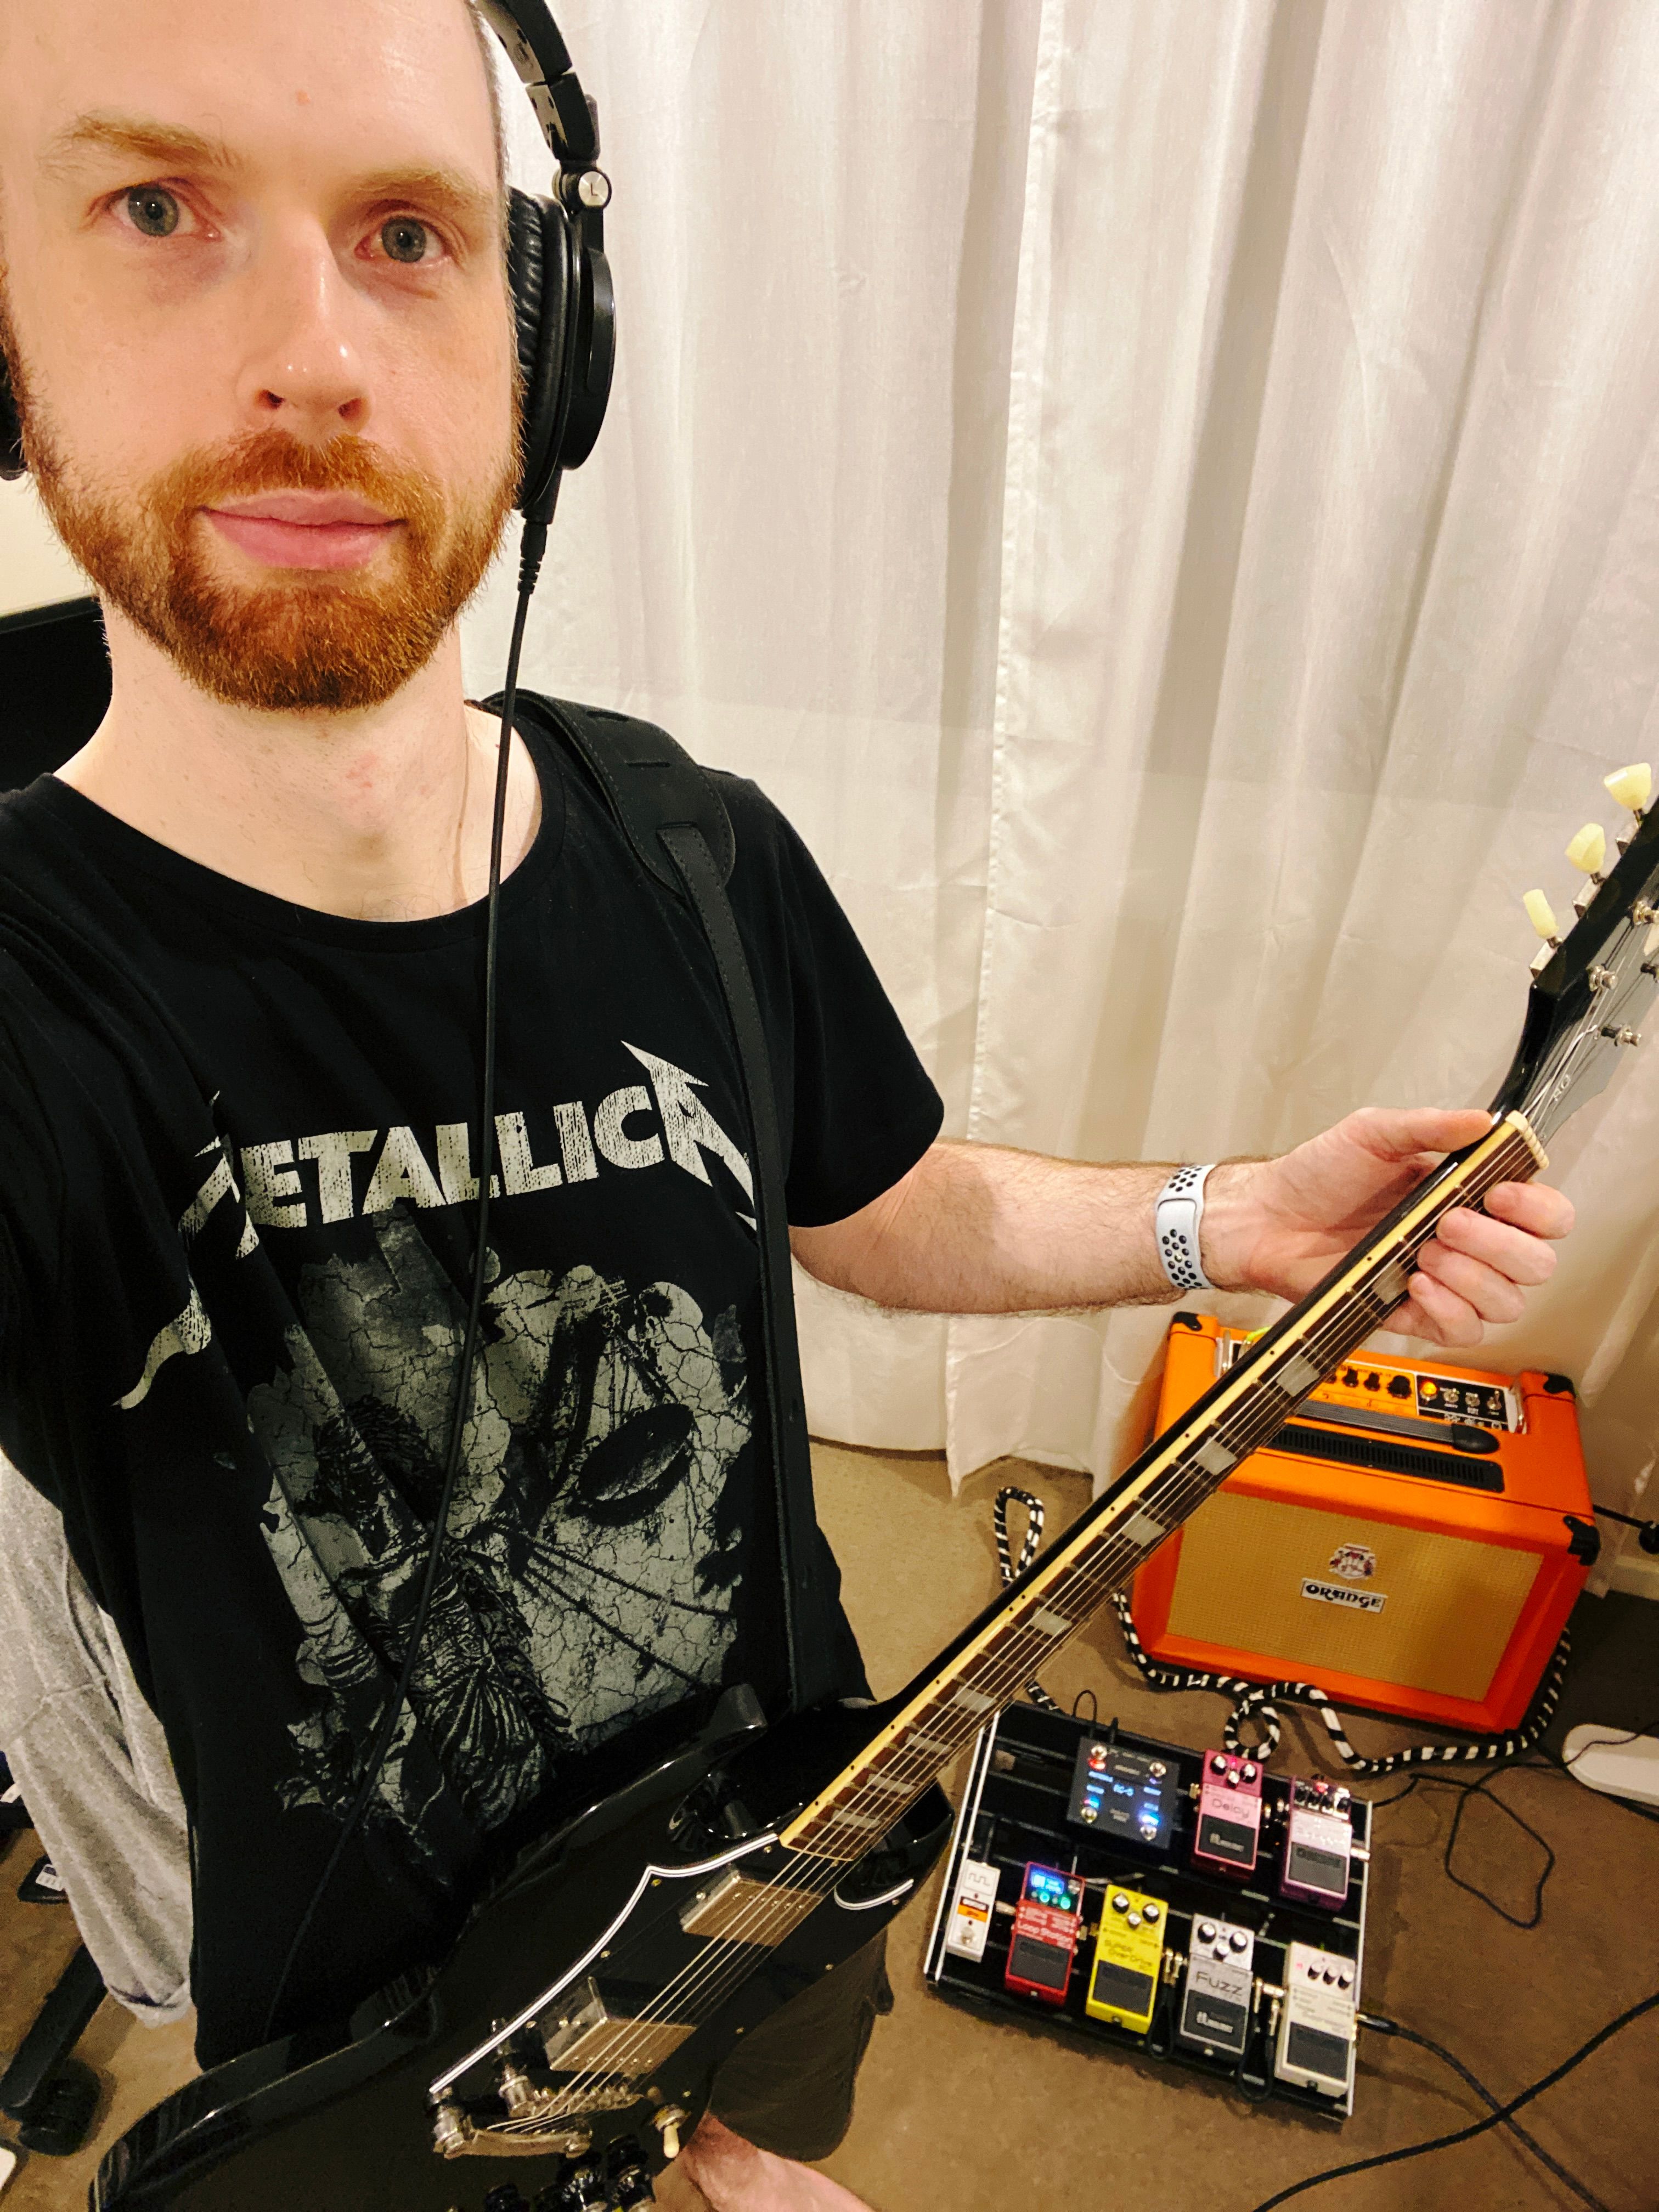 A selfie of me, a white man with short hair and a short red beard (and a very receding hairline) wearing a black Metallica t-shirt and holding a black electric guitar. In the background on the floor are my guitar amp and pedal board.